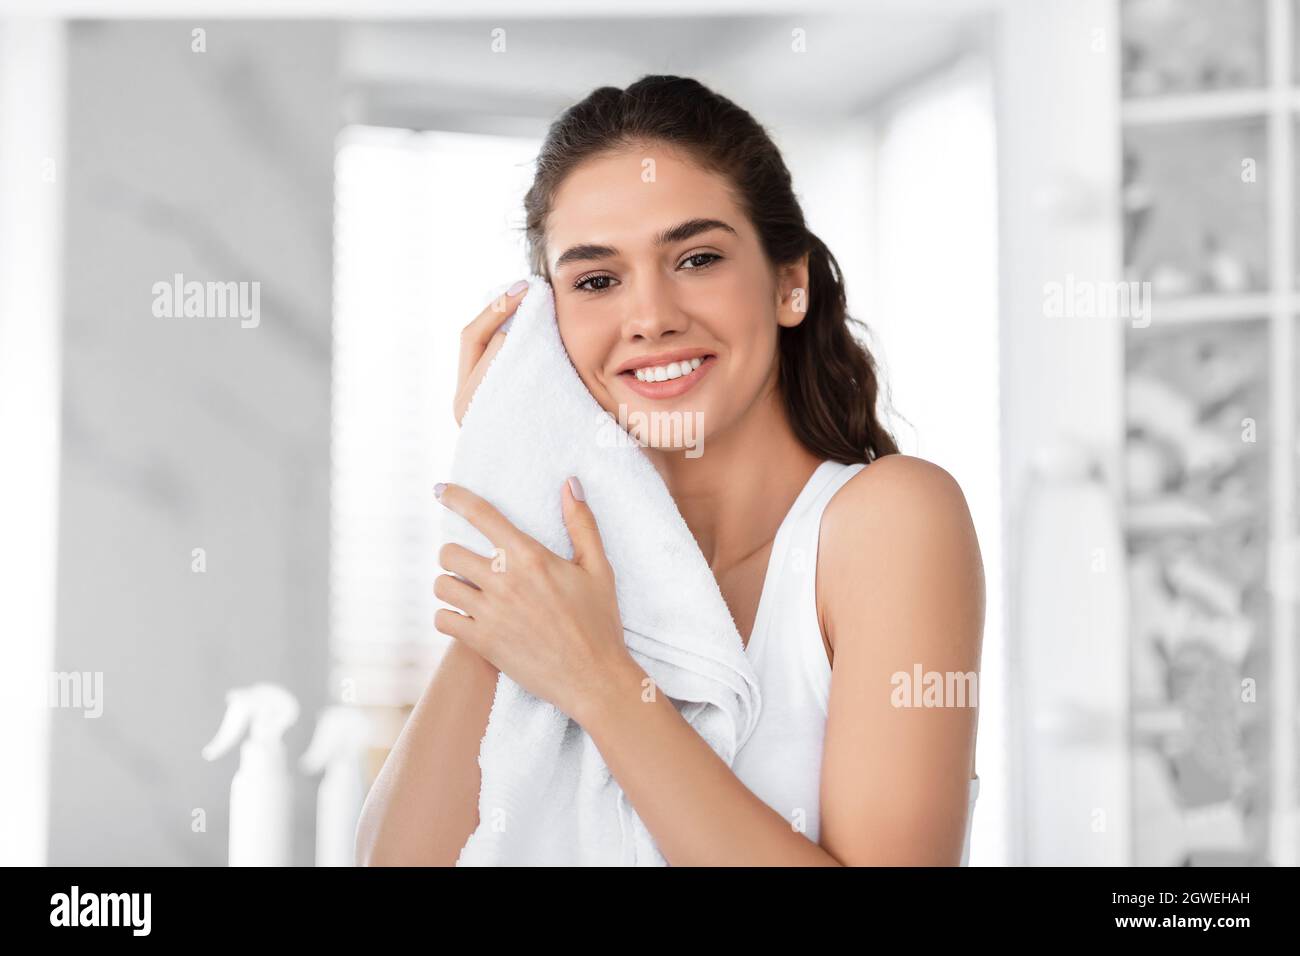 https://c8.alamy.com/comp/2GWEHAH/portrait-of-young-woman-drying-face-with-towel-smiling-to-camera-standing-after-shower-in-bathroom-at-home-morning-beauty-and-hygiene-routine-and-fac-2GWEHAH.jpg